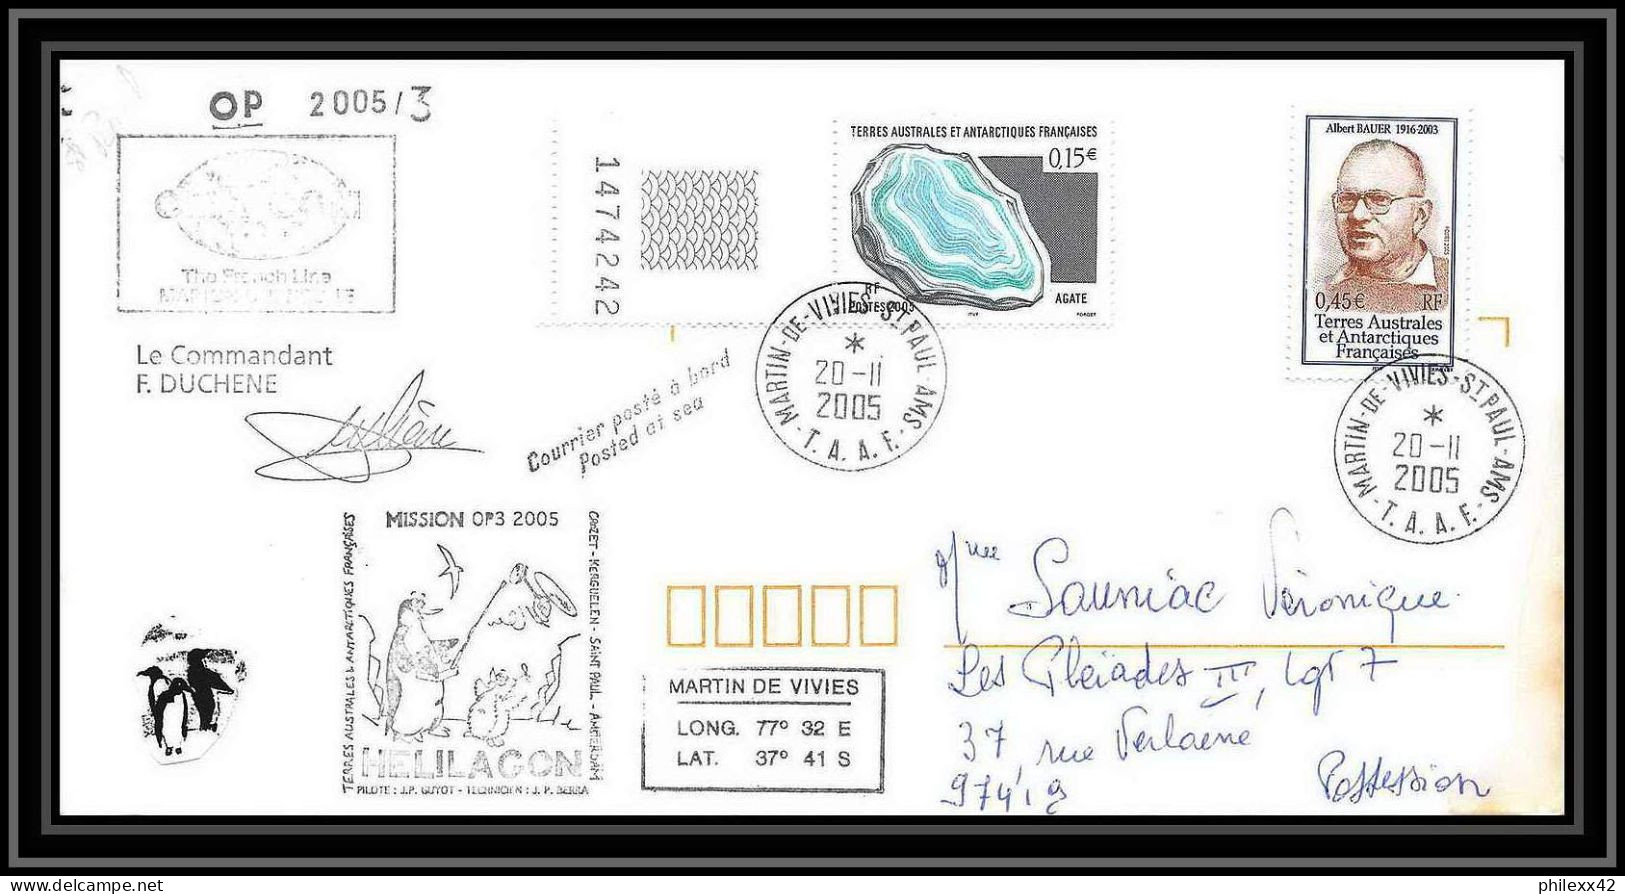 2537 ANTARCTIC Terres Australes TAAF Lettre Cover Dufresne 2 Signé Signed Op 2005/3 KERGUELEN 20/11/2005 N°405 Helilagon - Helicopters